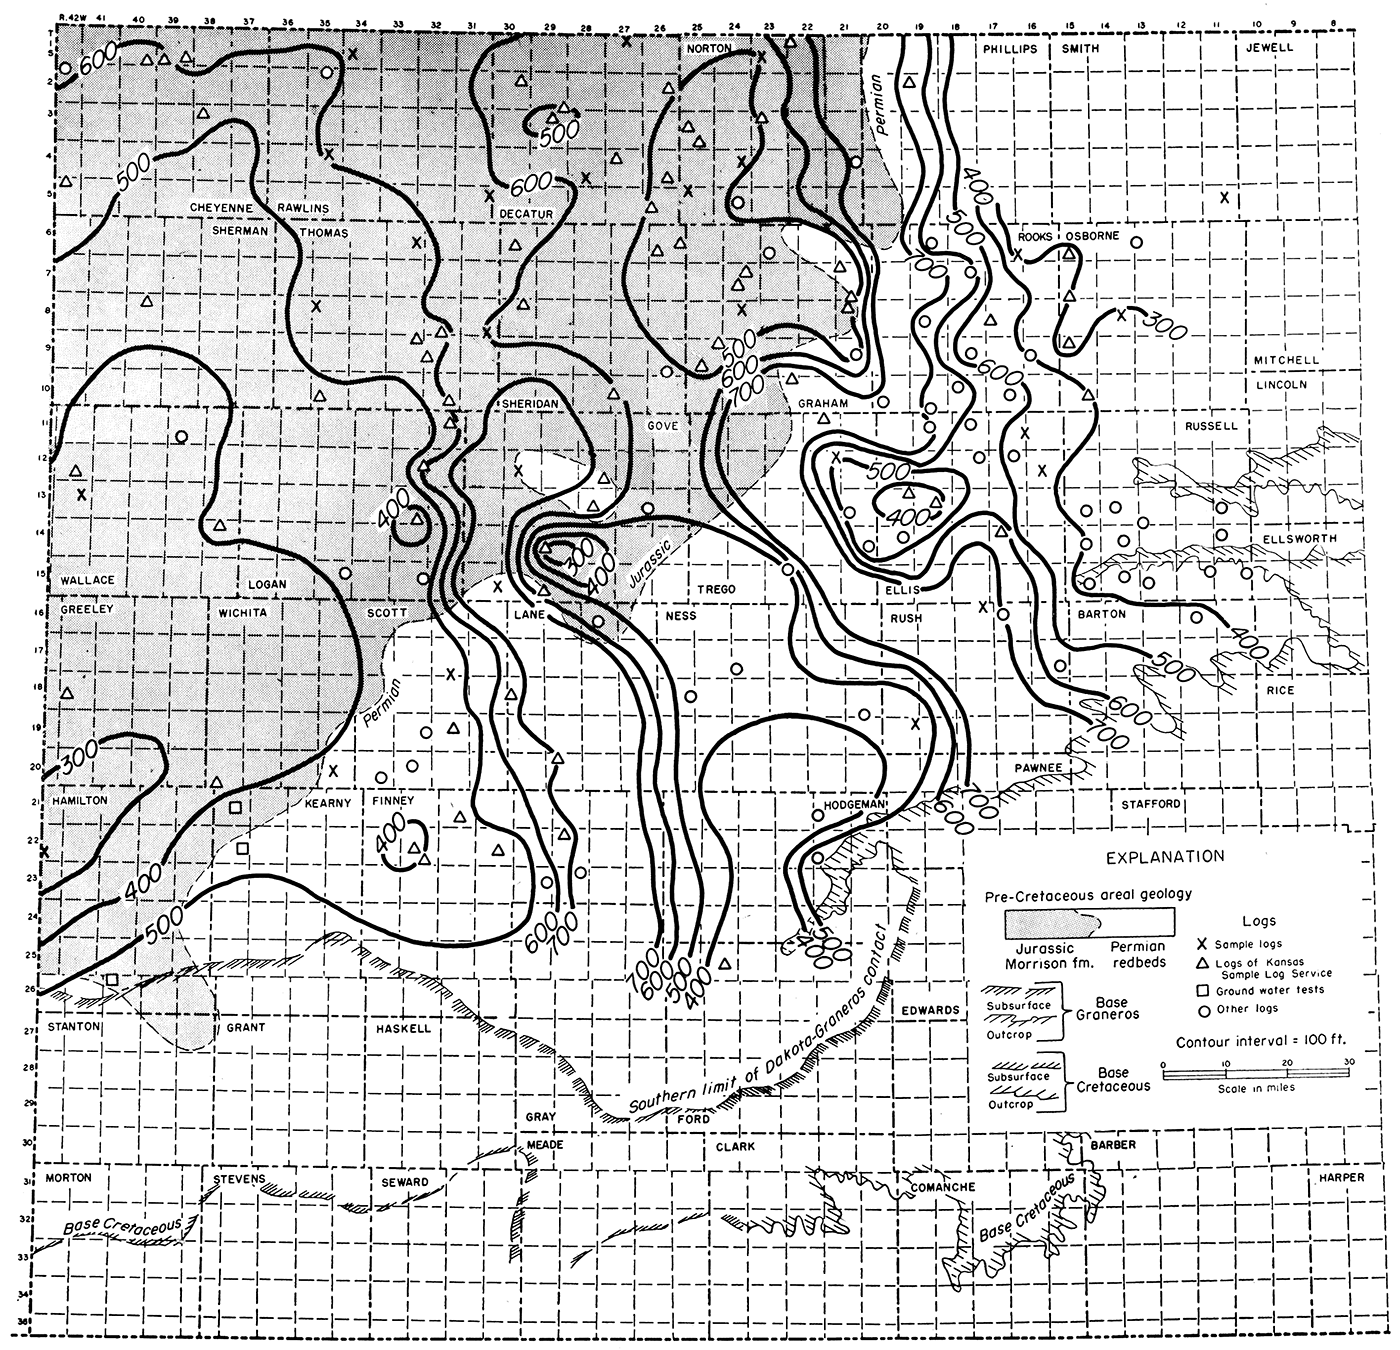 Isopachous map showing by 100-foot contours the thickness of the interval between the top of the Dakota formation and the base of the Cretaceous rocks.